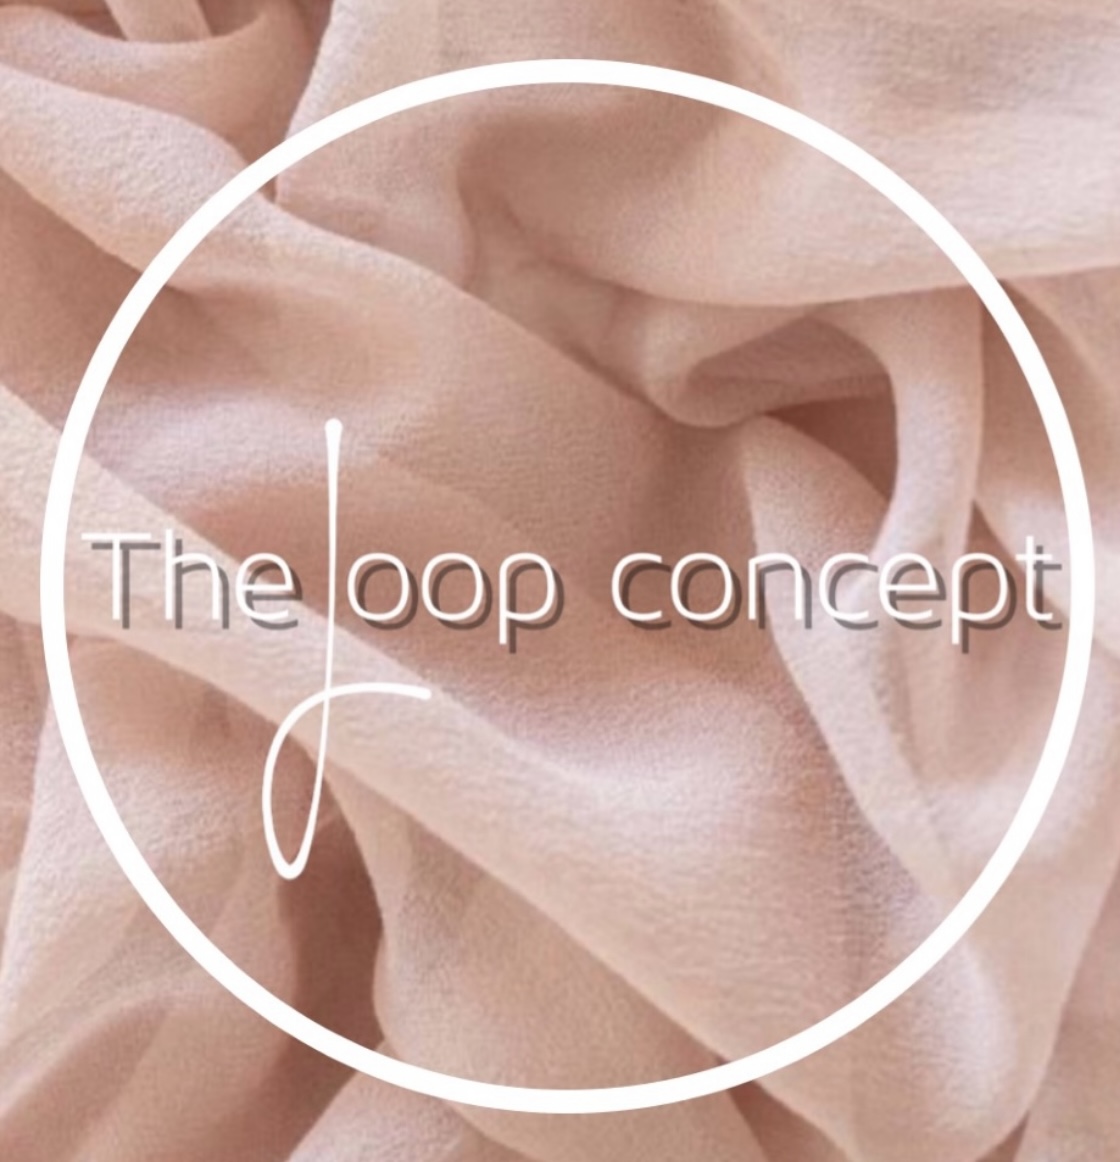 The loop concept